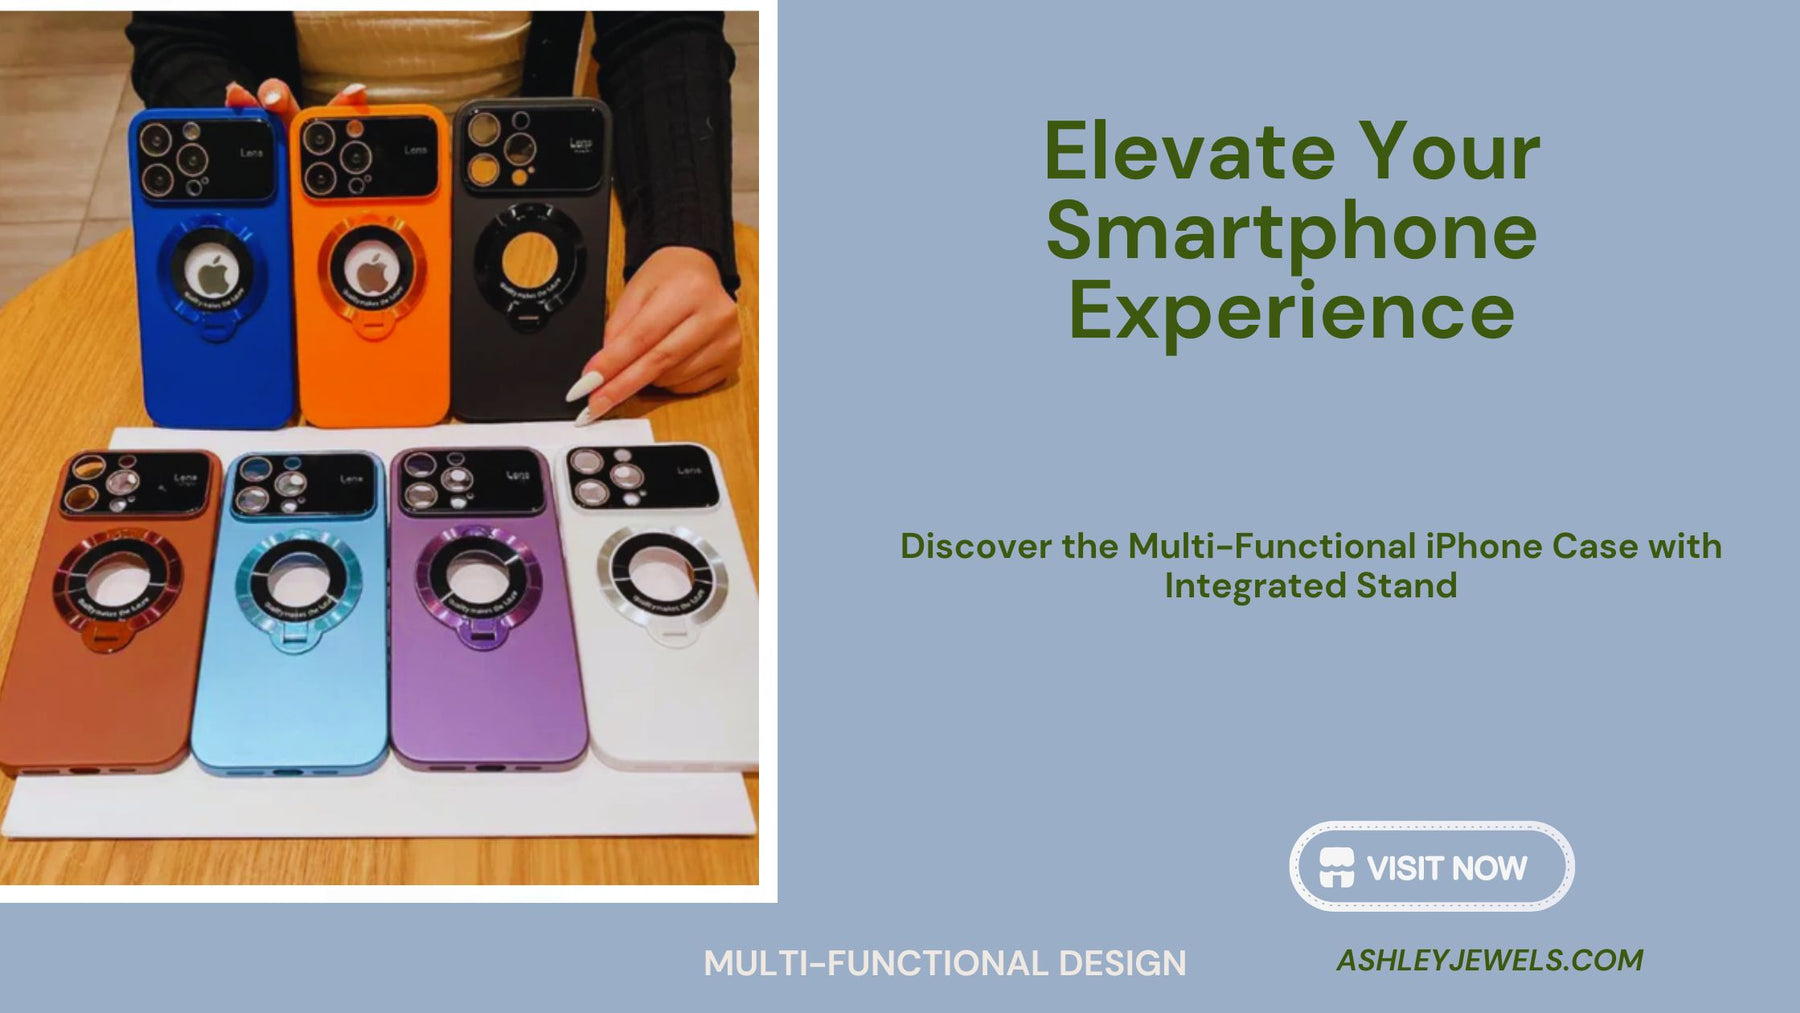 Elevate Your Smartphone Experience: Discover the Multi-Functional iPhone Case with Integrated Stand